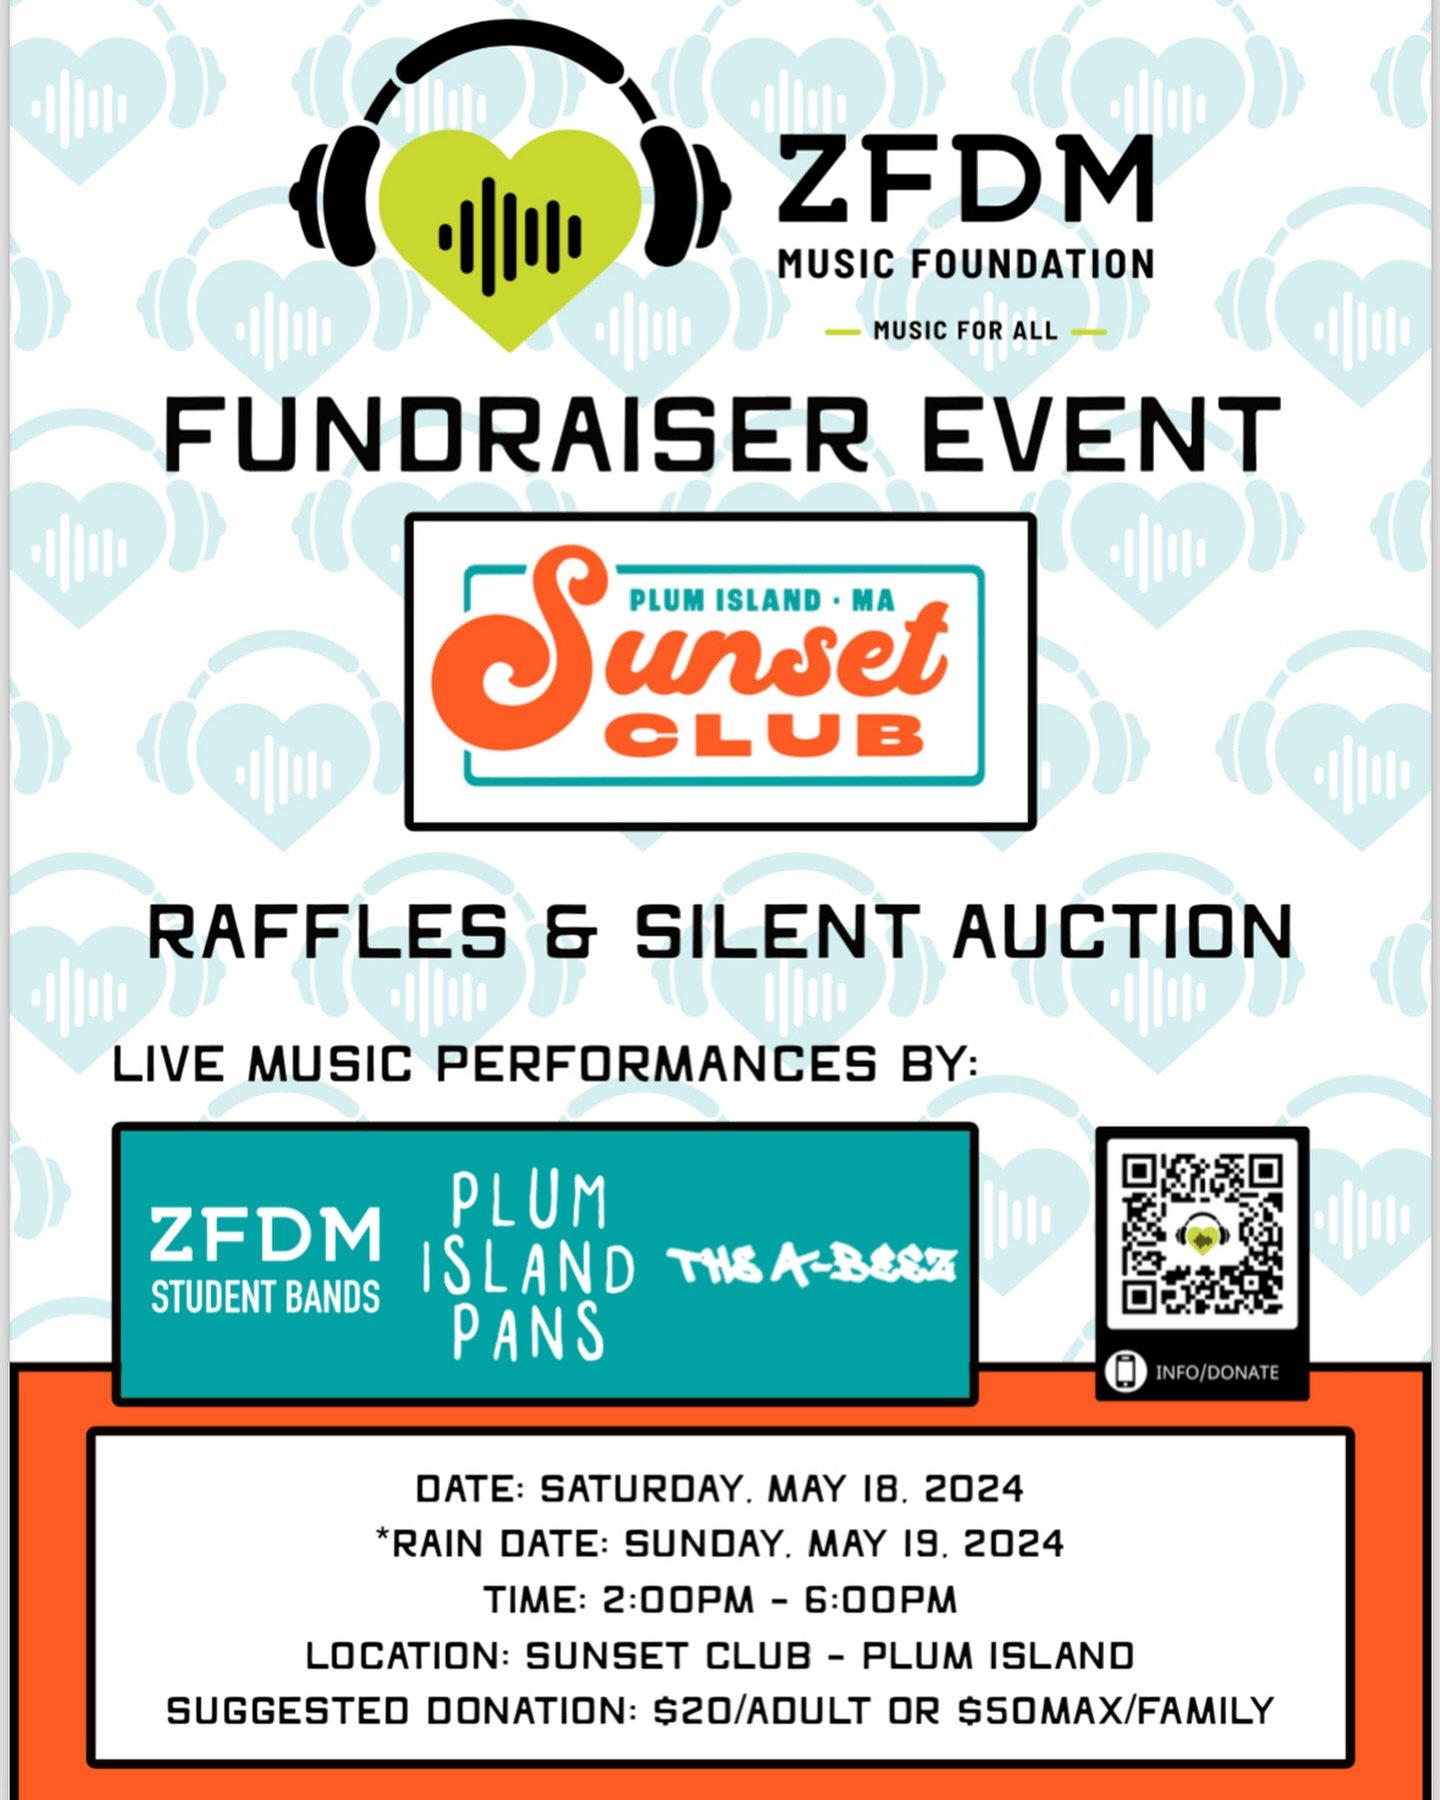 We are SO EXCITED to host a concert to raise money for ZFDM Music Foundation, whose goal is to give music to as many kids as possible! They help provide instruments, music lessons and financial assistance to kids who either don&rsquo;t have public mu